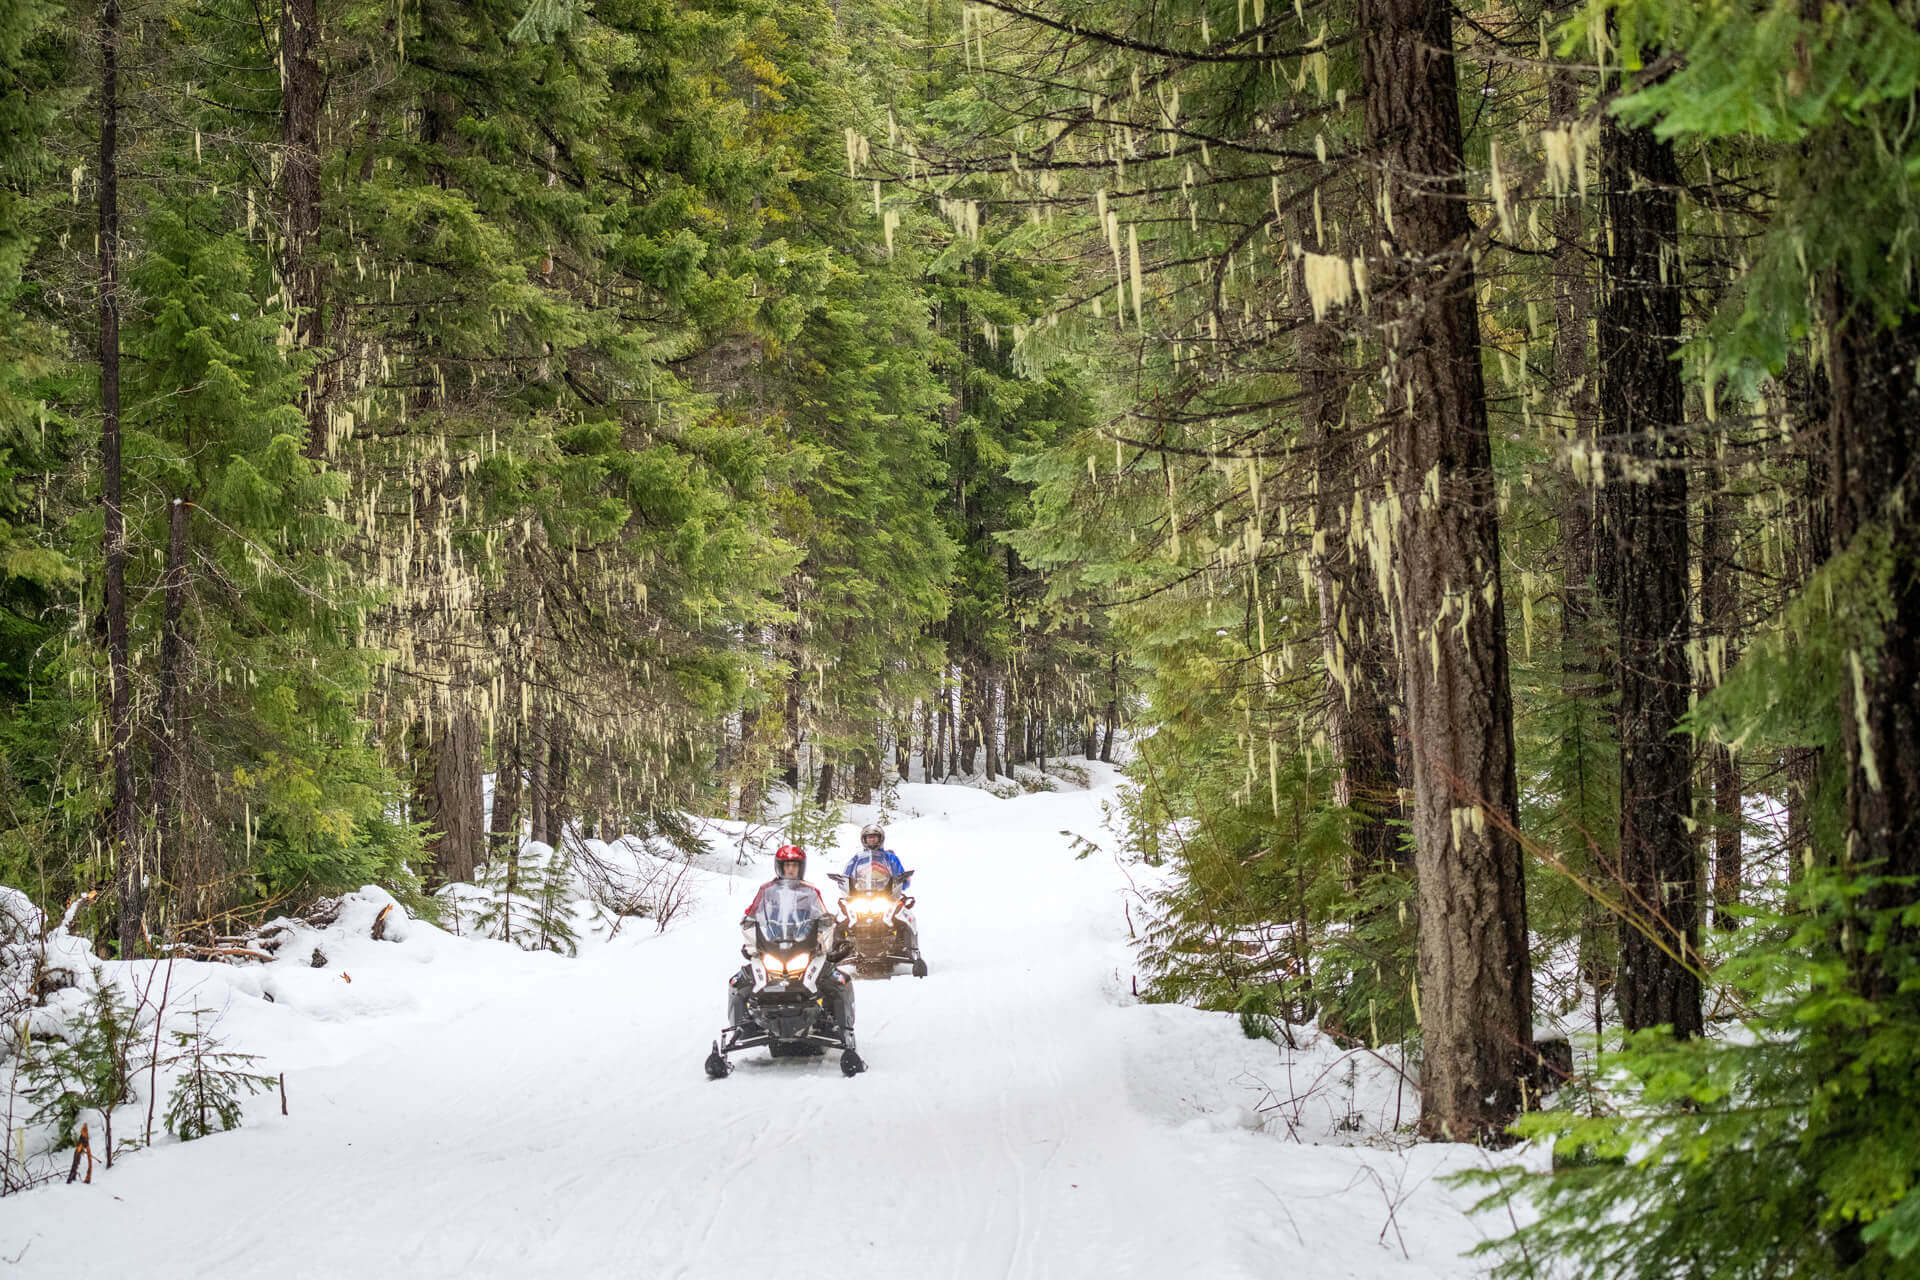 Two people ride snowmobiles through the forest